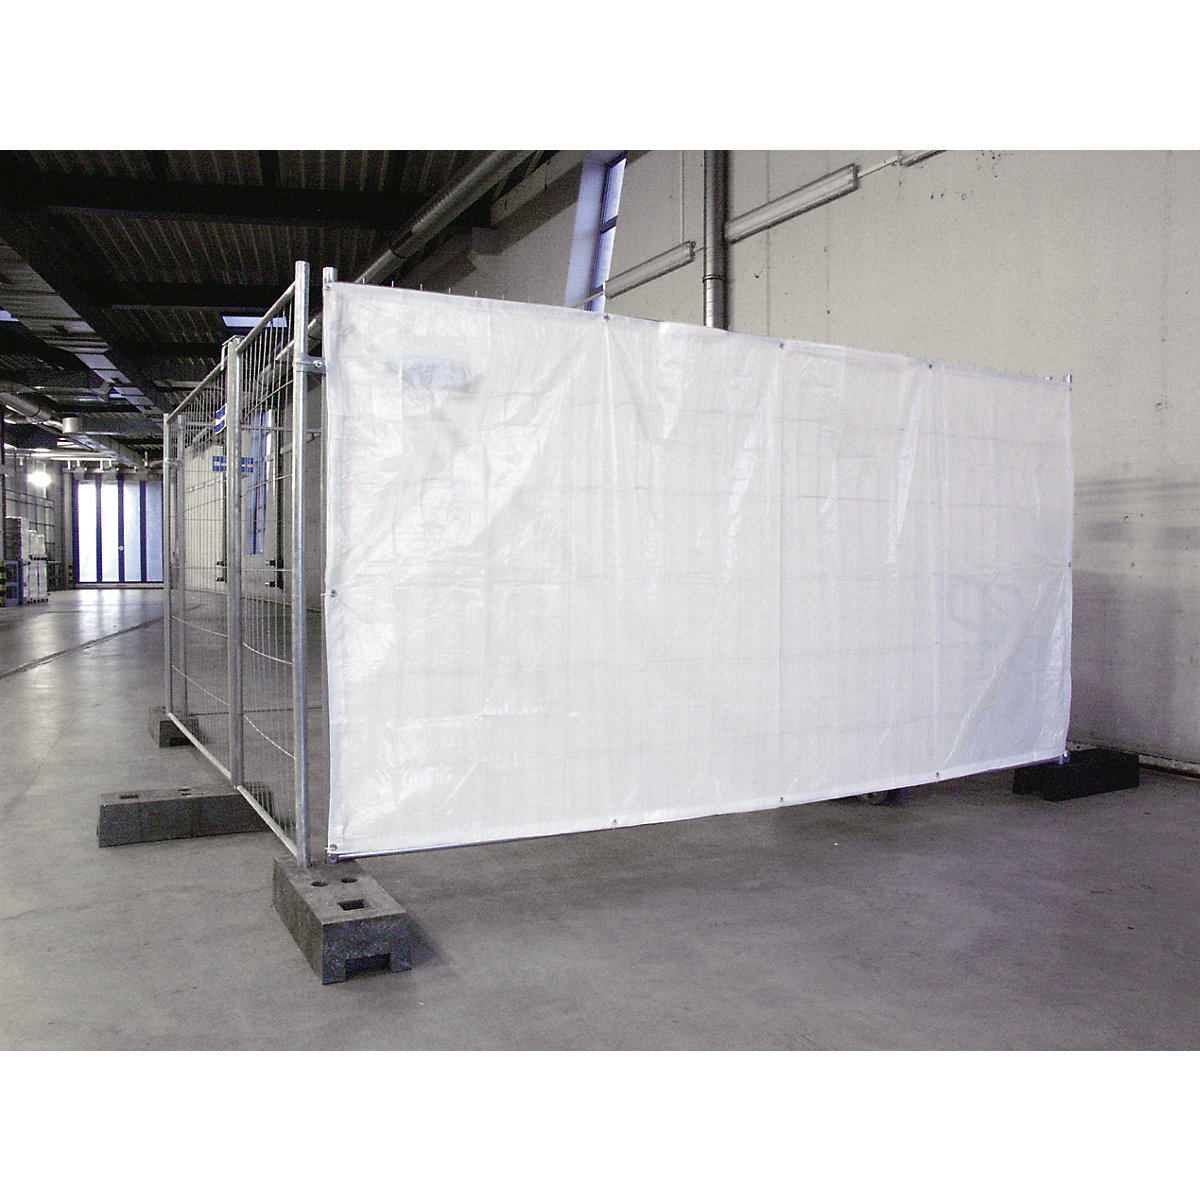 Opaque sheet for mobile security fencing